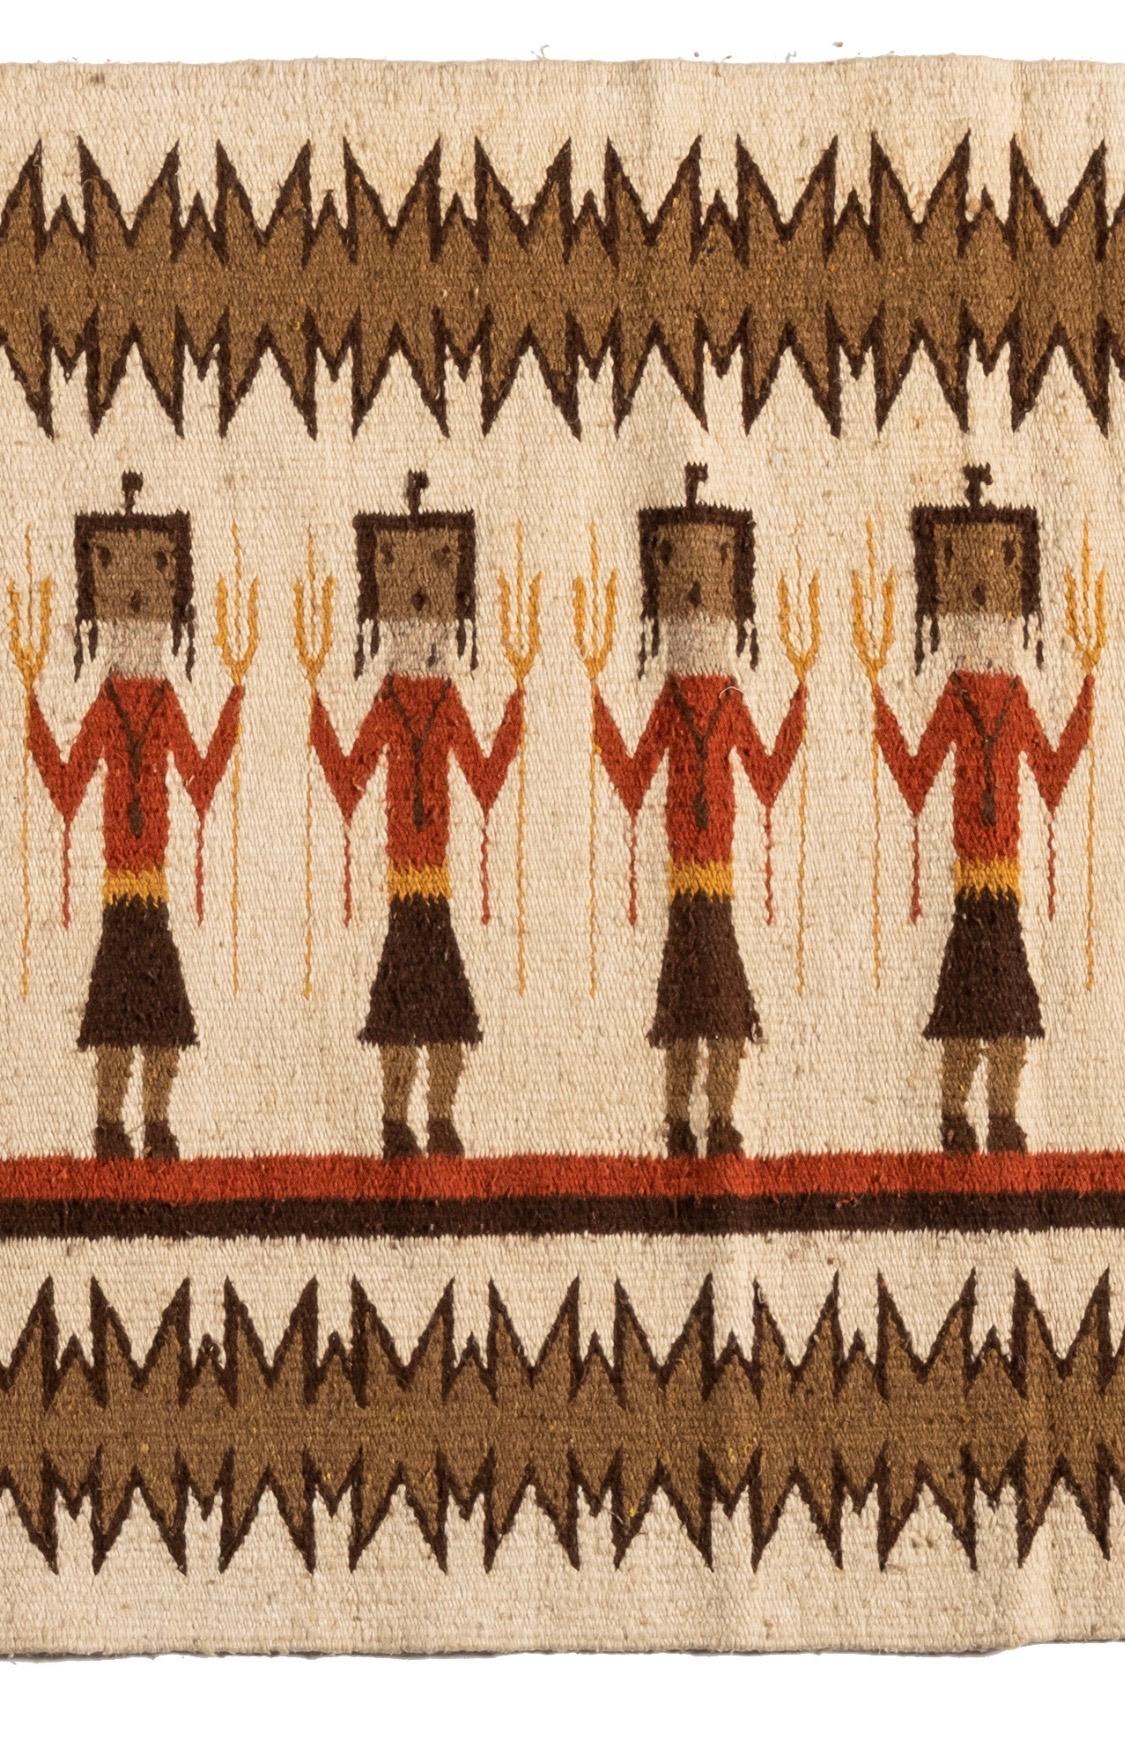 Antique native American Navajo weaving rug with figures circa 1950s measuring 2.7 x 5.2 ft.

From the inception of weaving by the Navajos, circa 1700, weaving has provided an important economic benefit to the tribe and a fine outlet for their